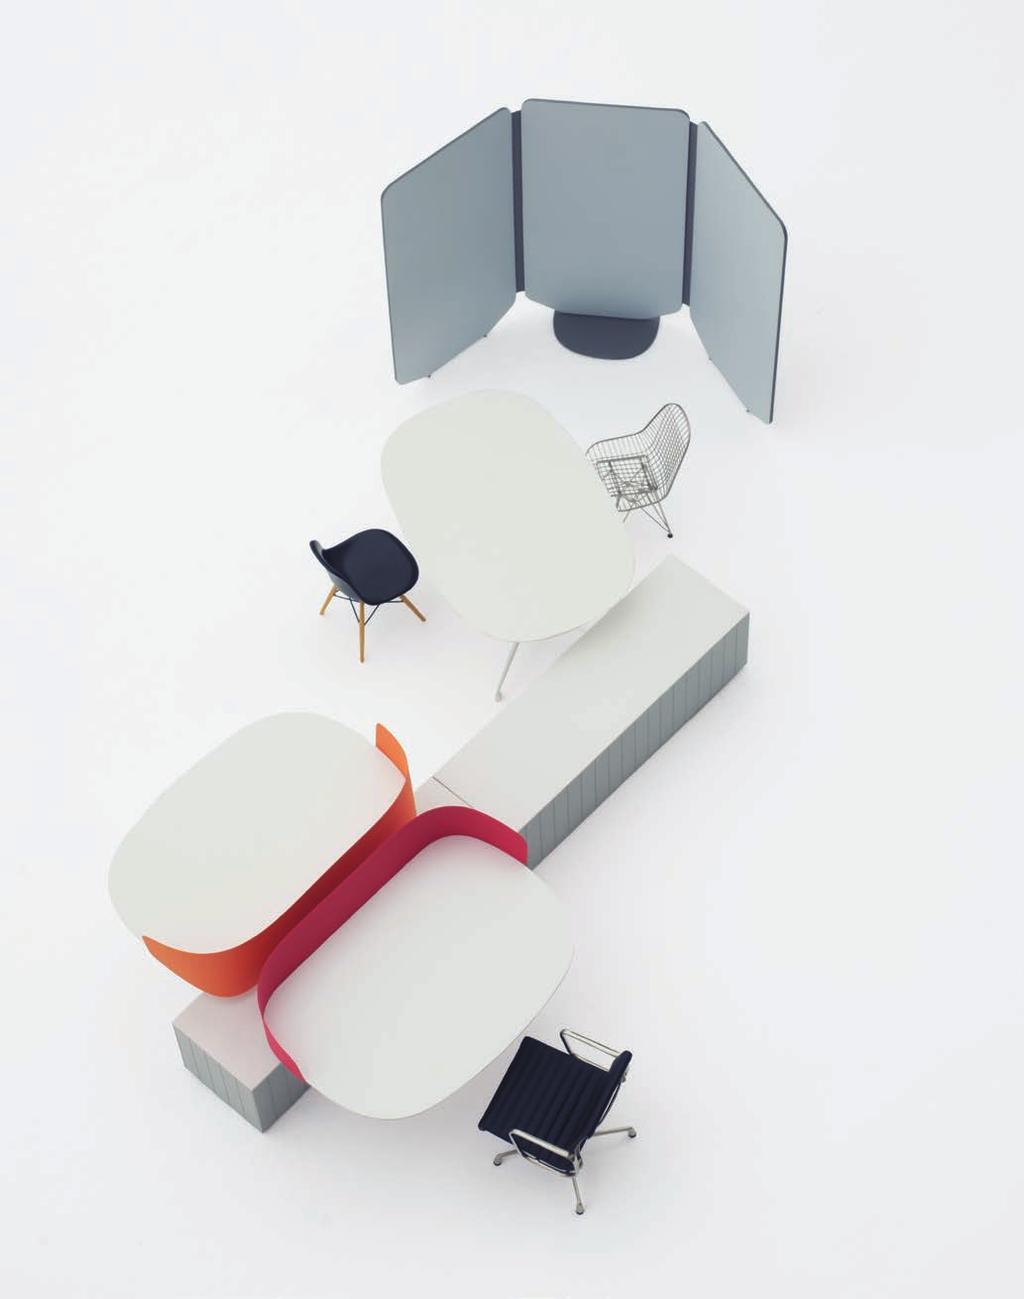 Minimal table legs foster unobstructed transitions between individual and group work, allowing people to gather